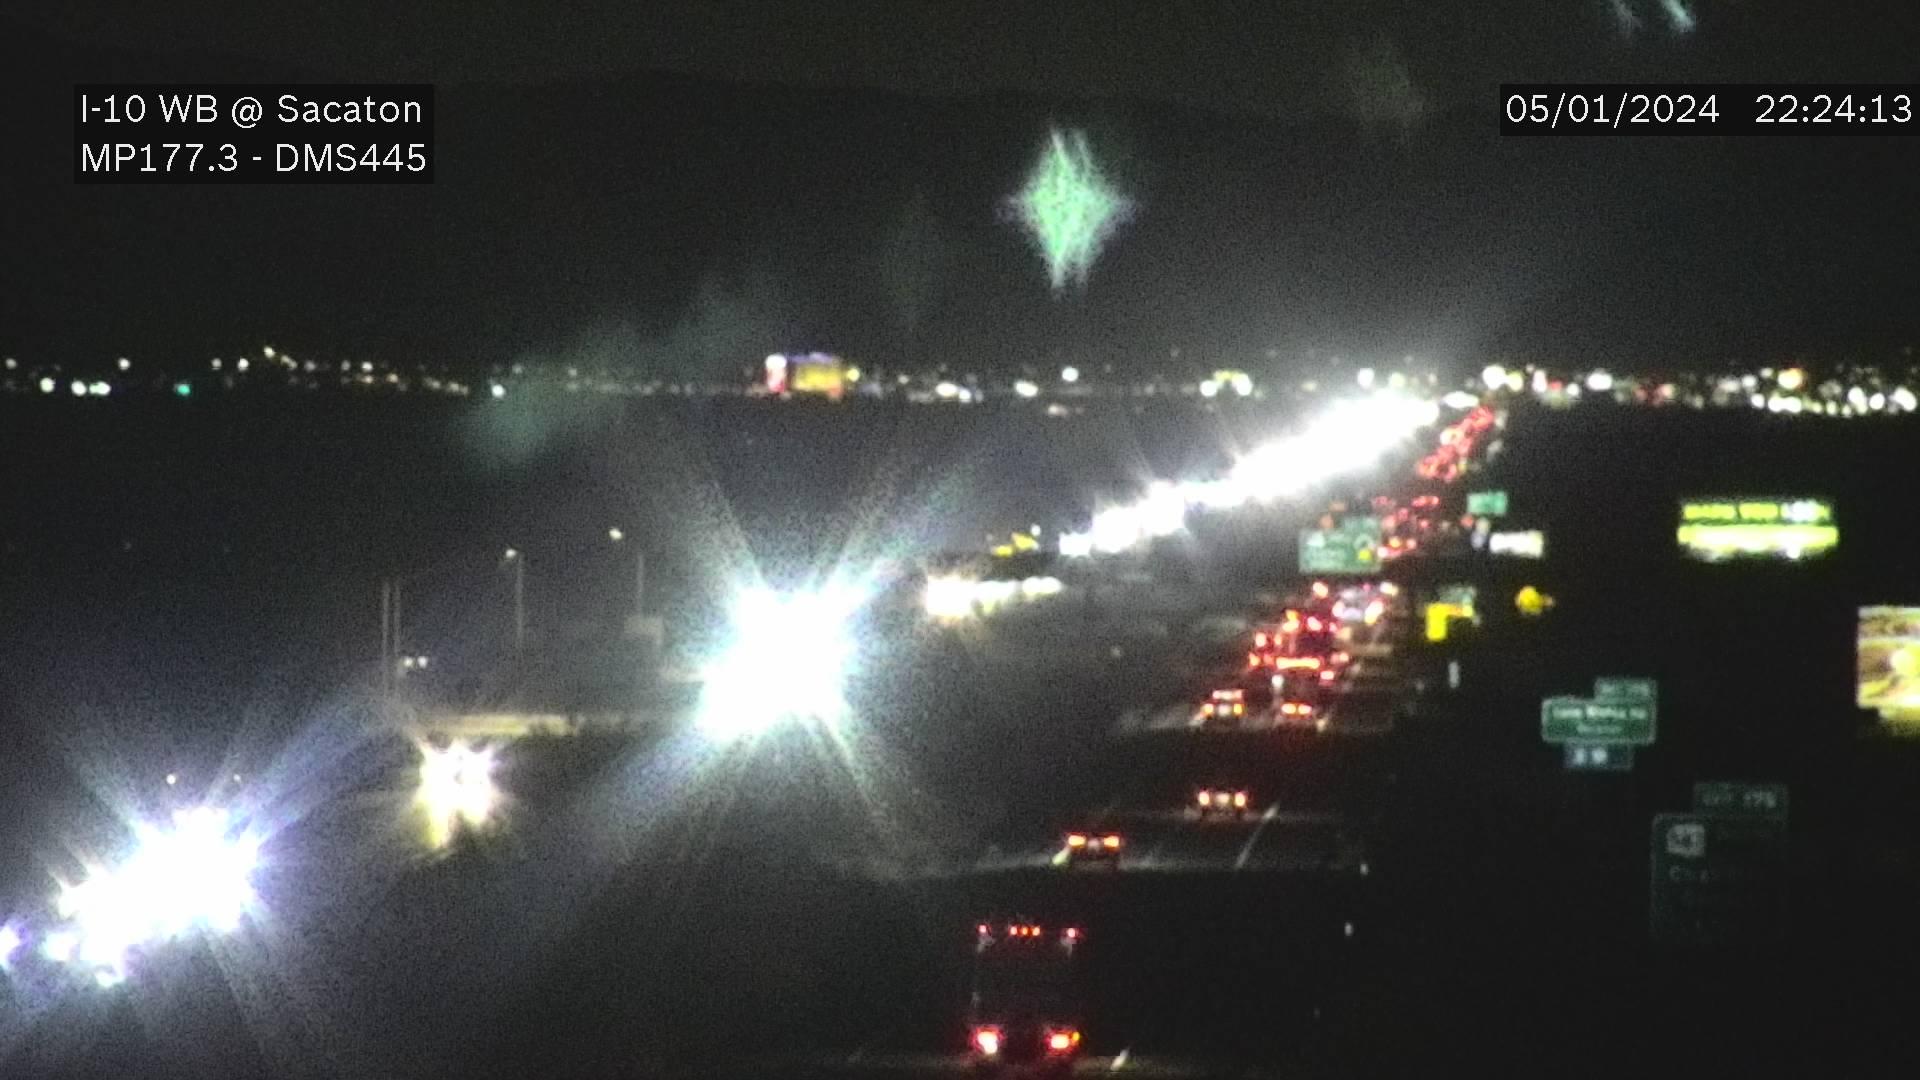 Traffic Cam Sweetwater › West: I-10 WB 177.30 @Sacaton Player